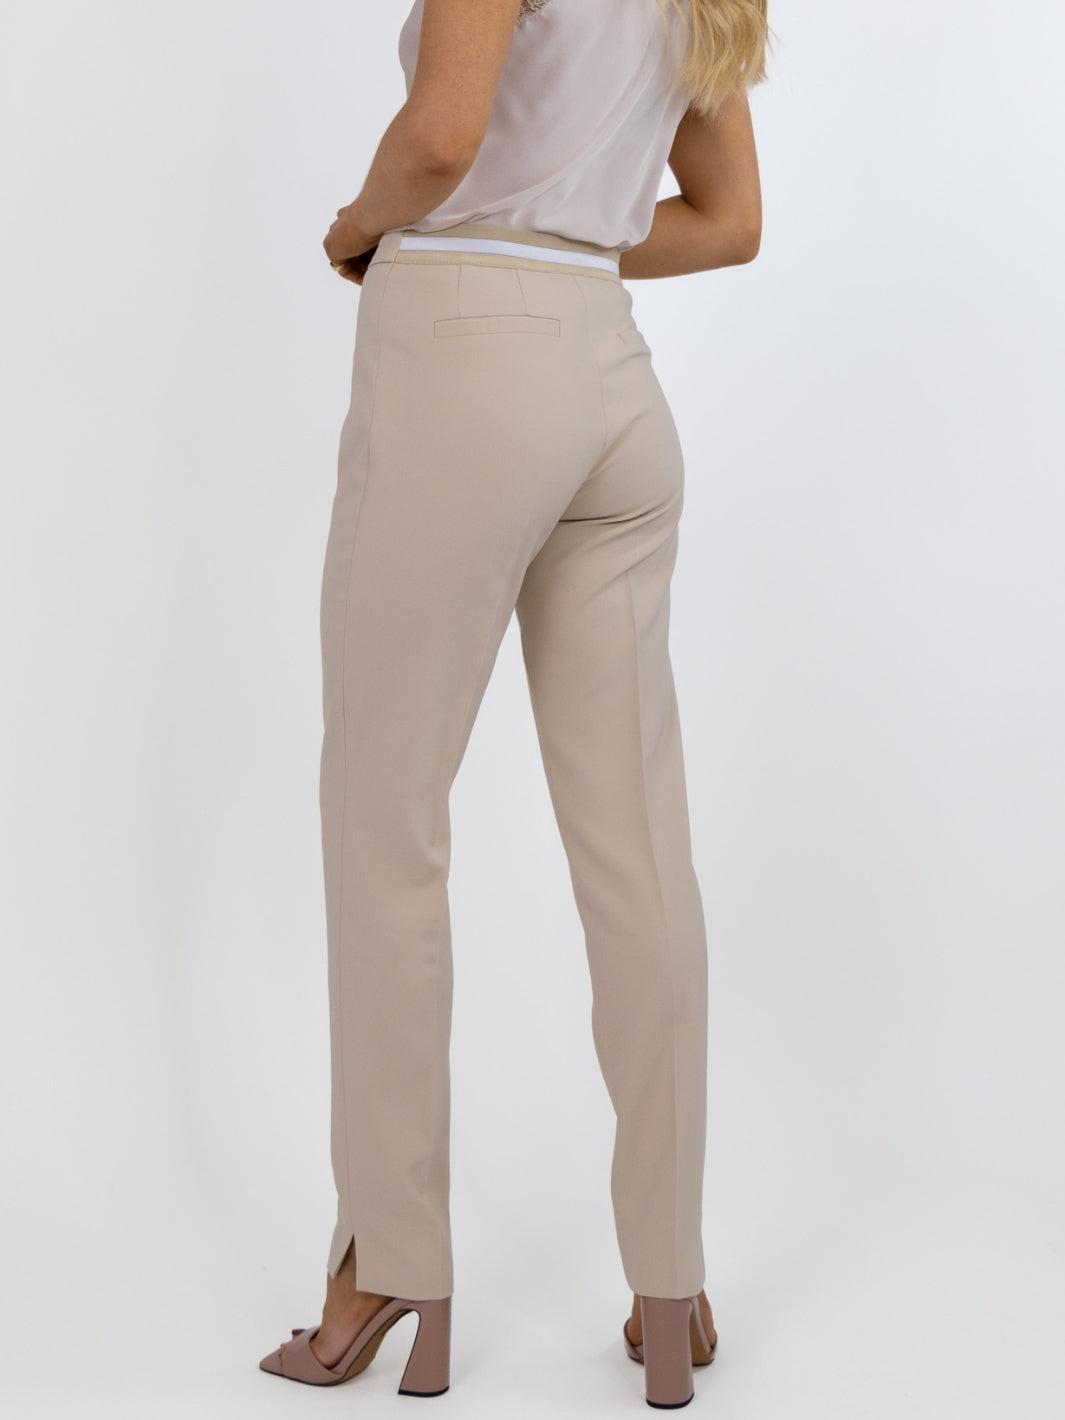 Kate & Pippa Sorrento Trousers In Beige Sand-Nicola Ross